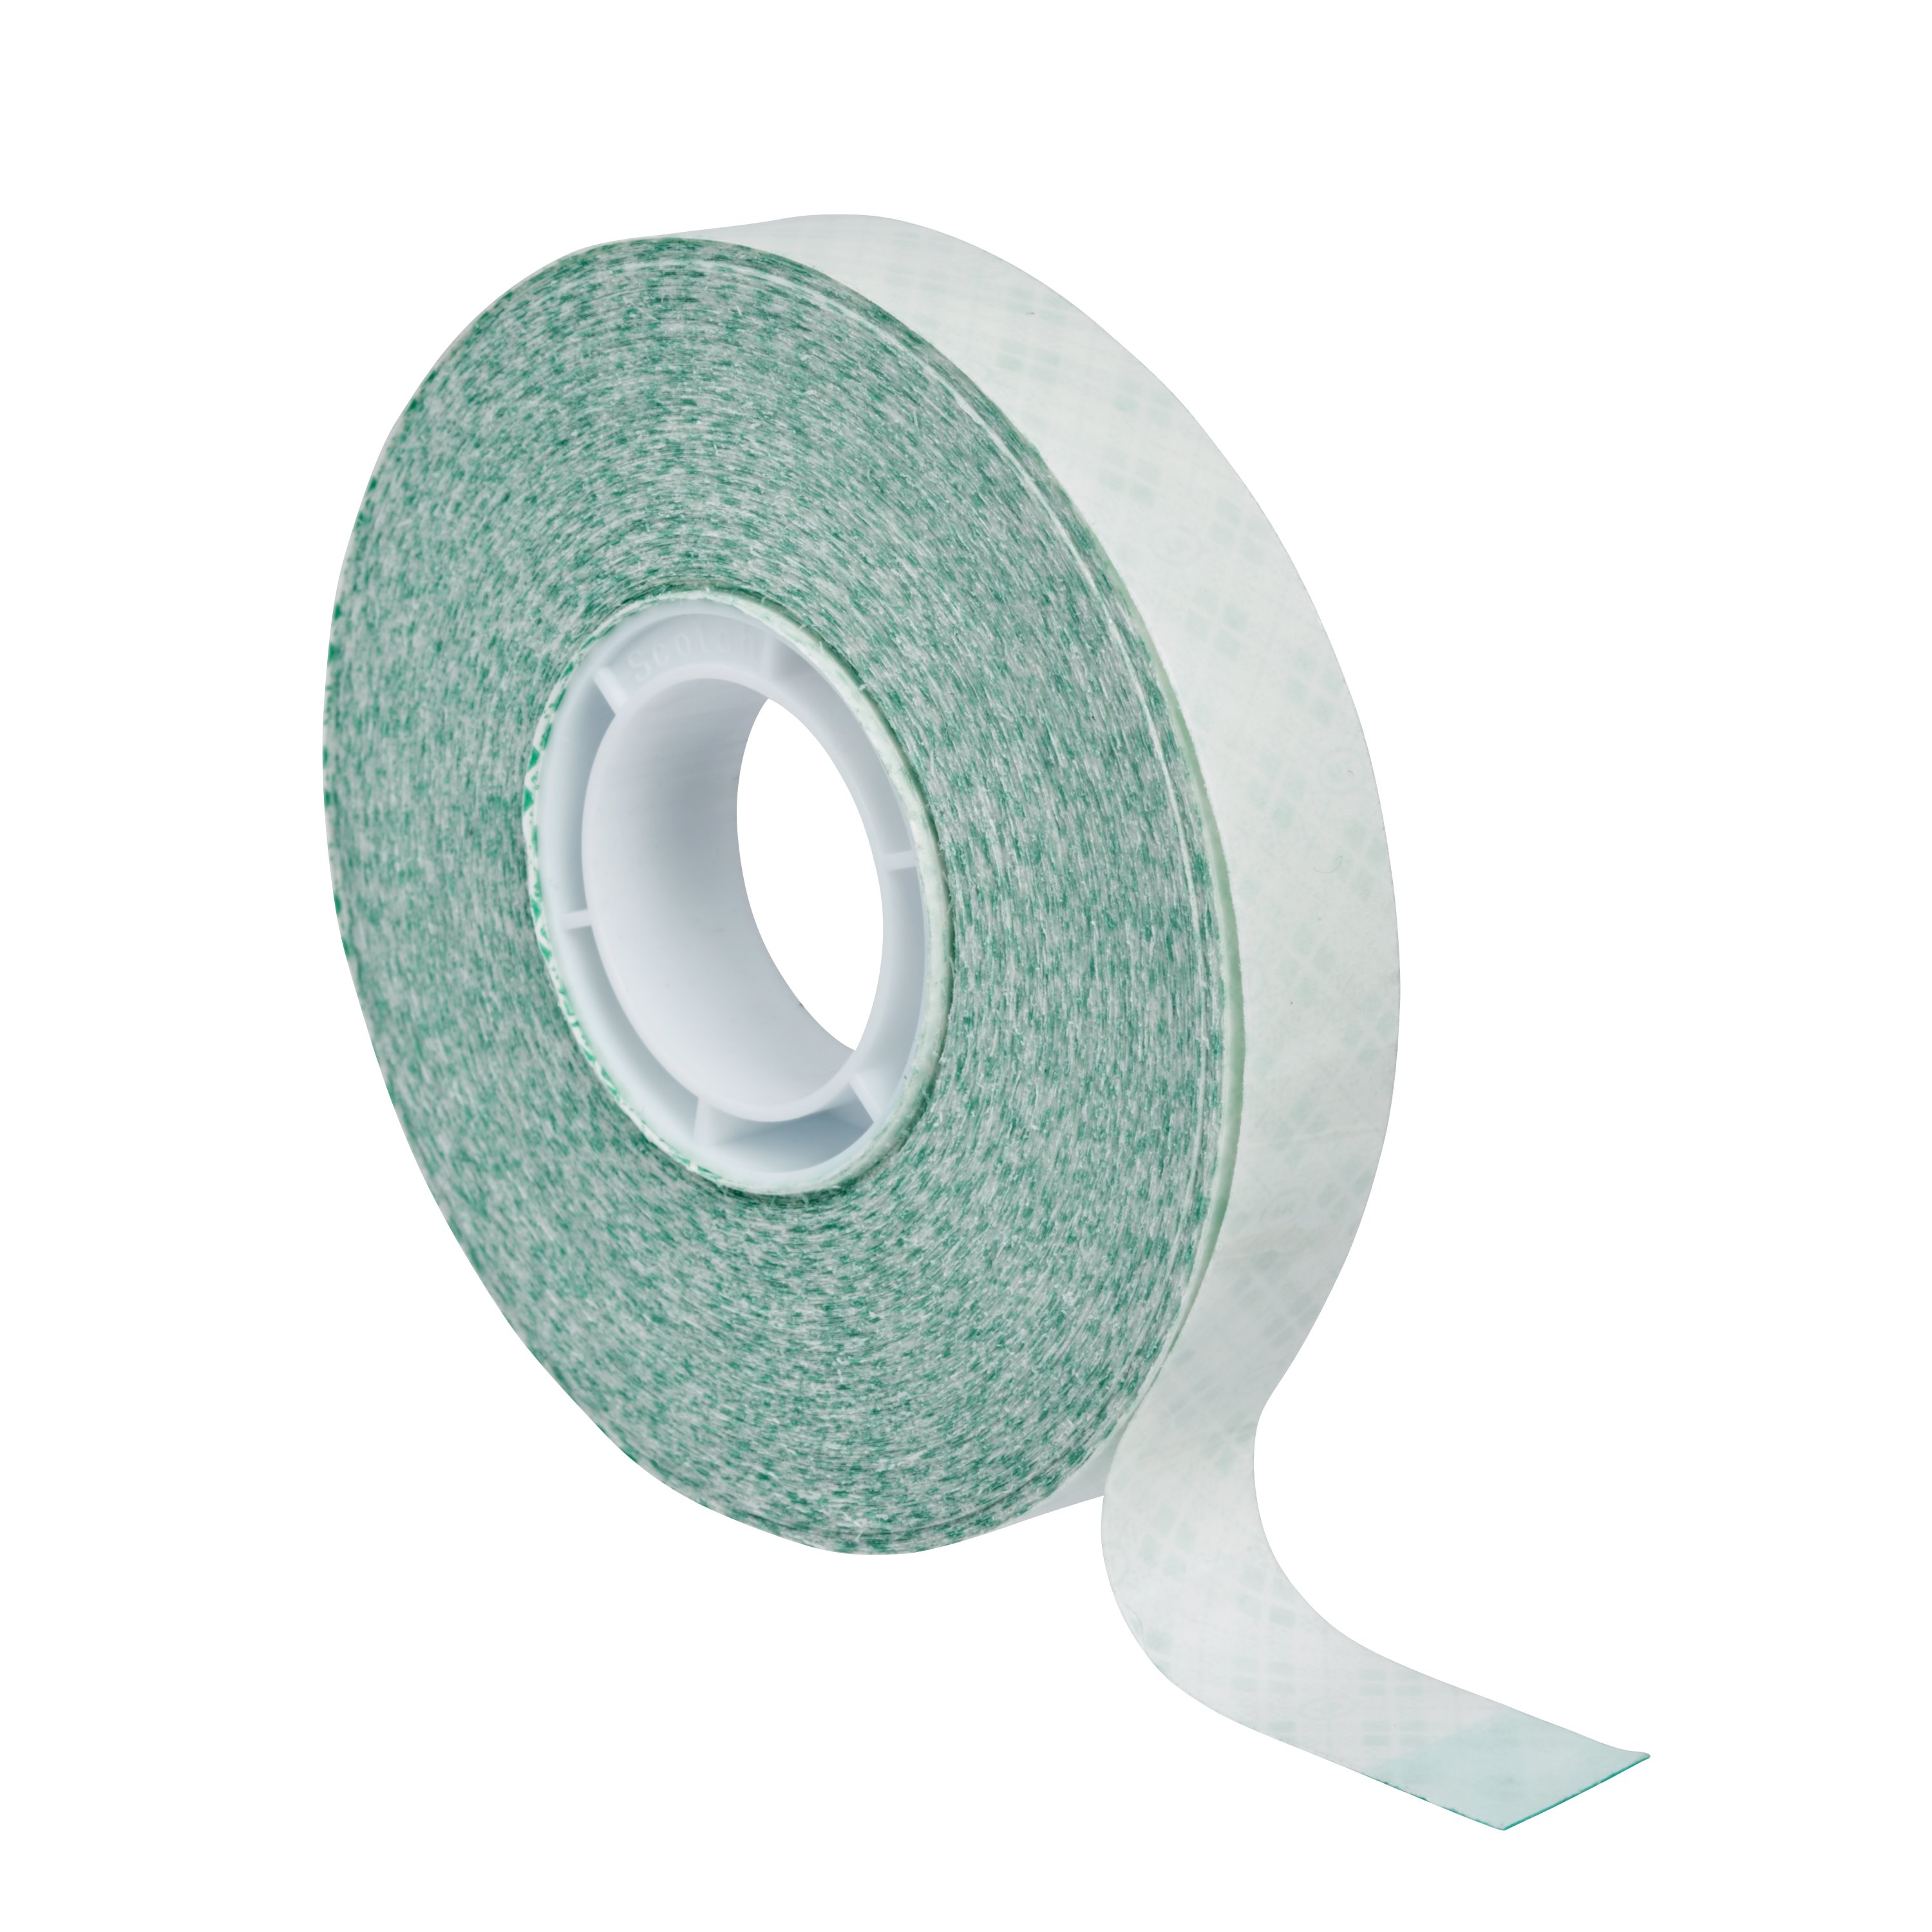 Scotch® ATG Adhesive Transfer Tape 969 bonds a wide variety of materials including plastics, glass, paints and materials with glossy surfaces.